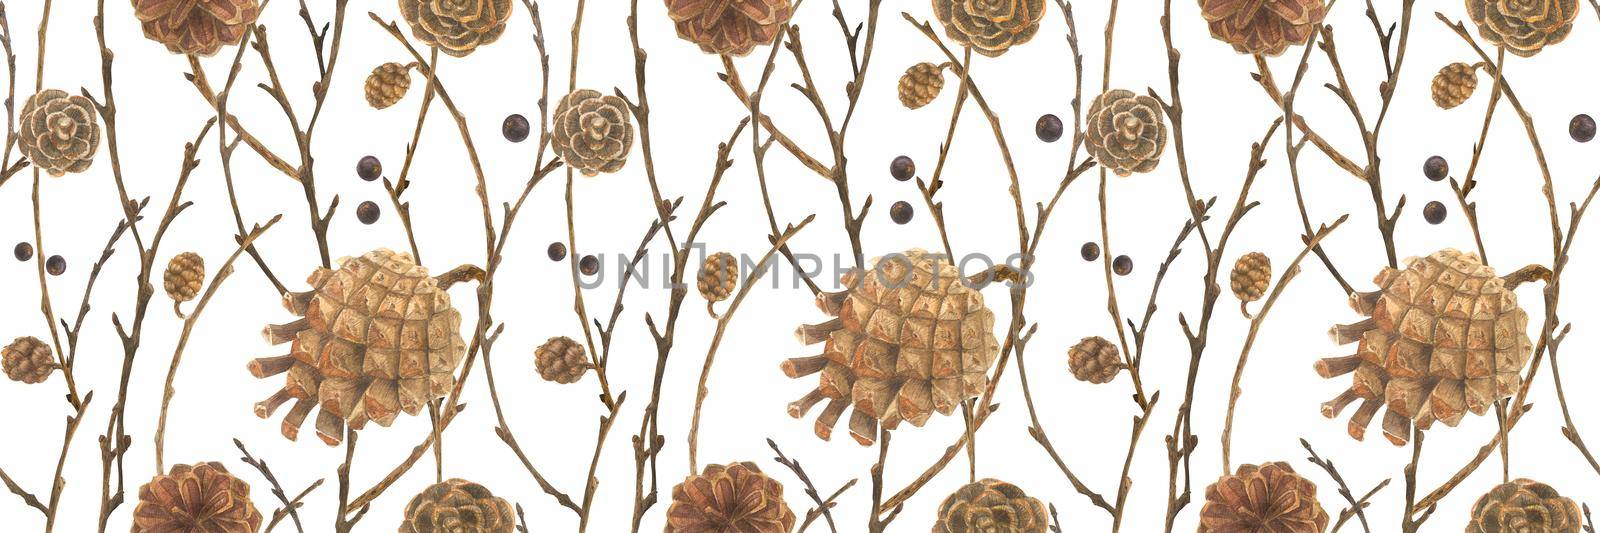 Botanical watercolor. Cones and branches. Wood seamless pattern for Christmas textile and web design